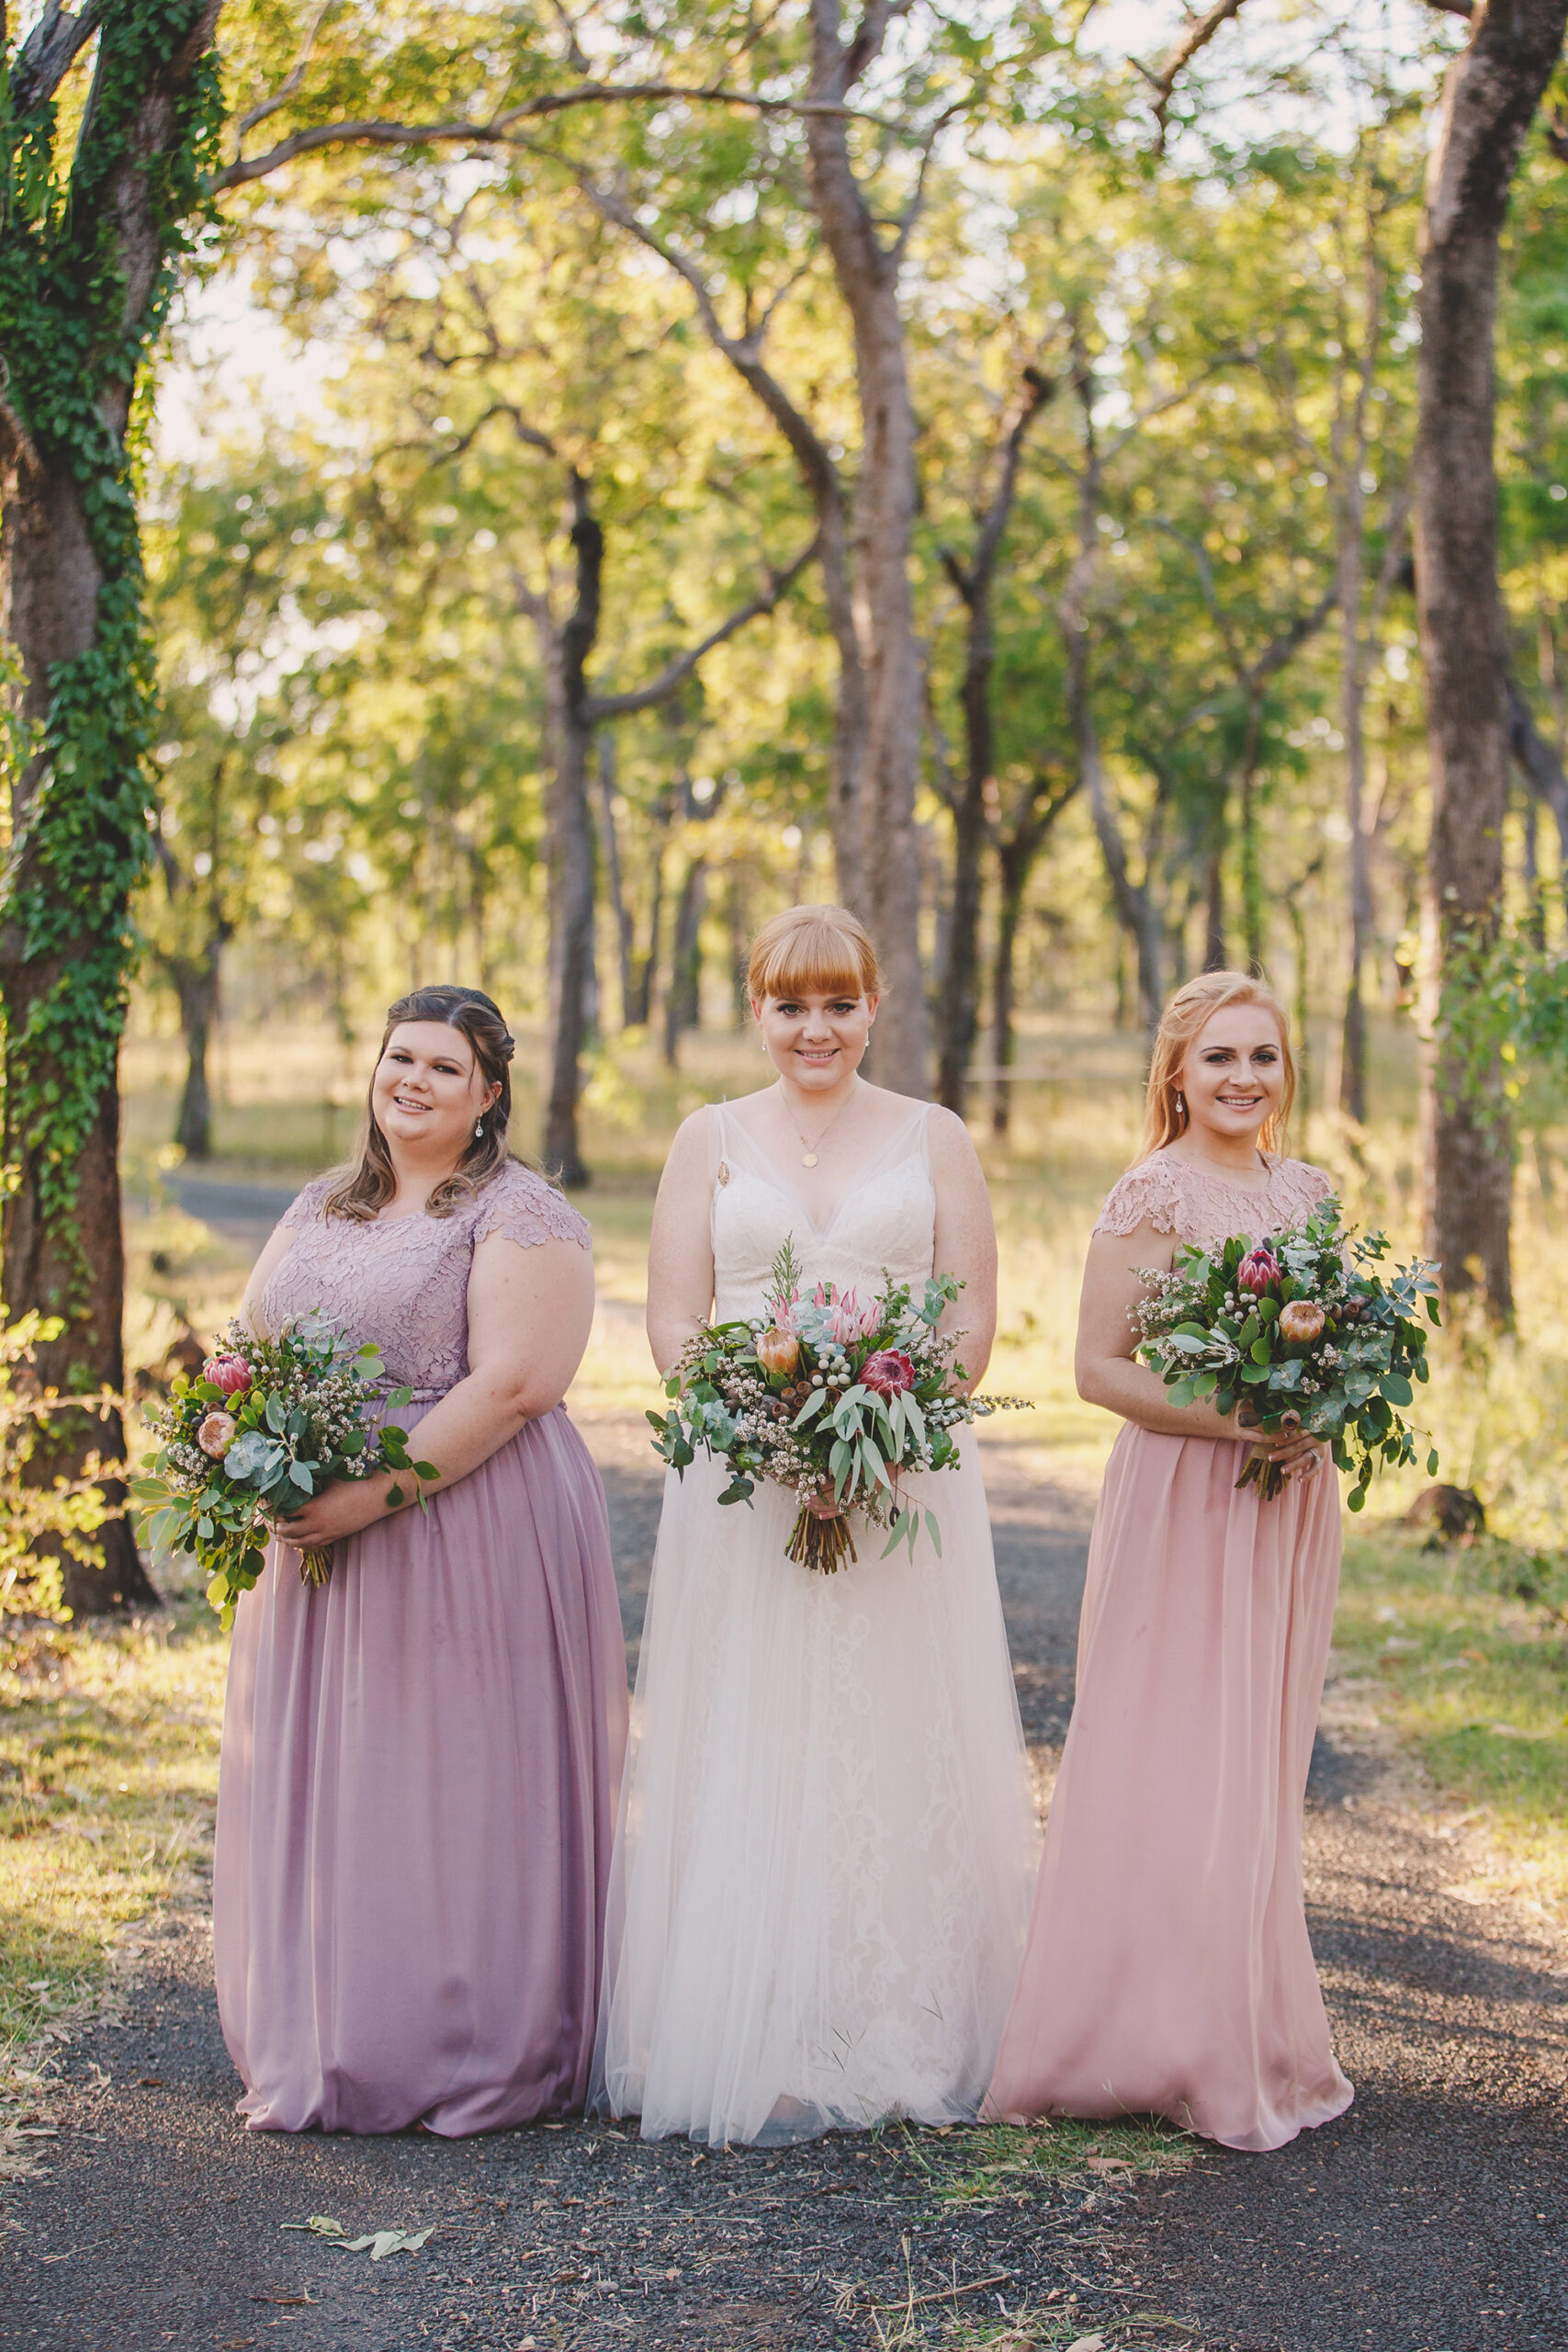 Jessica Joel Country Rustic Wedding Something Special Photography SBS 016 scaled